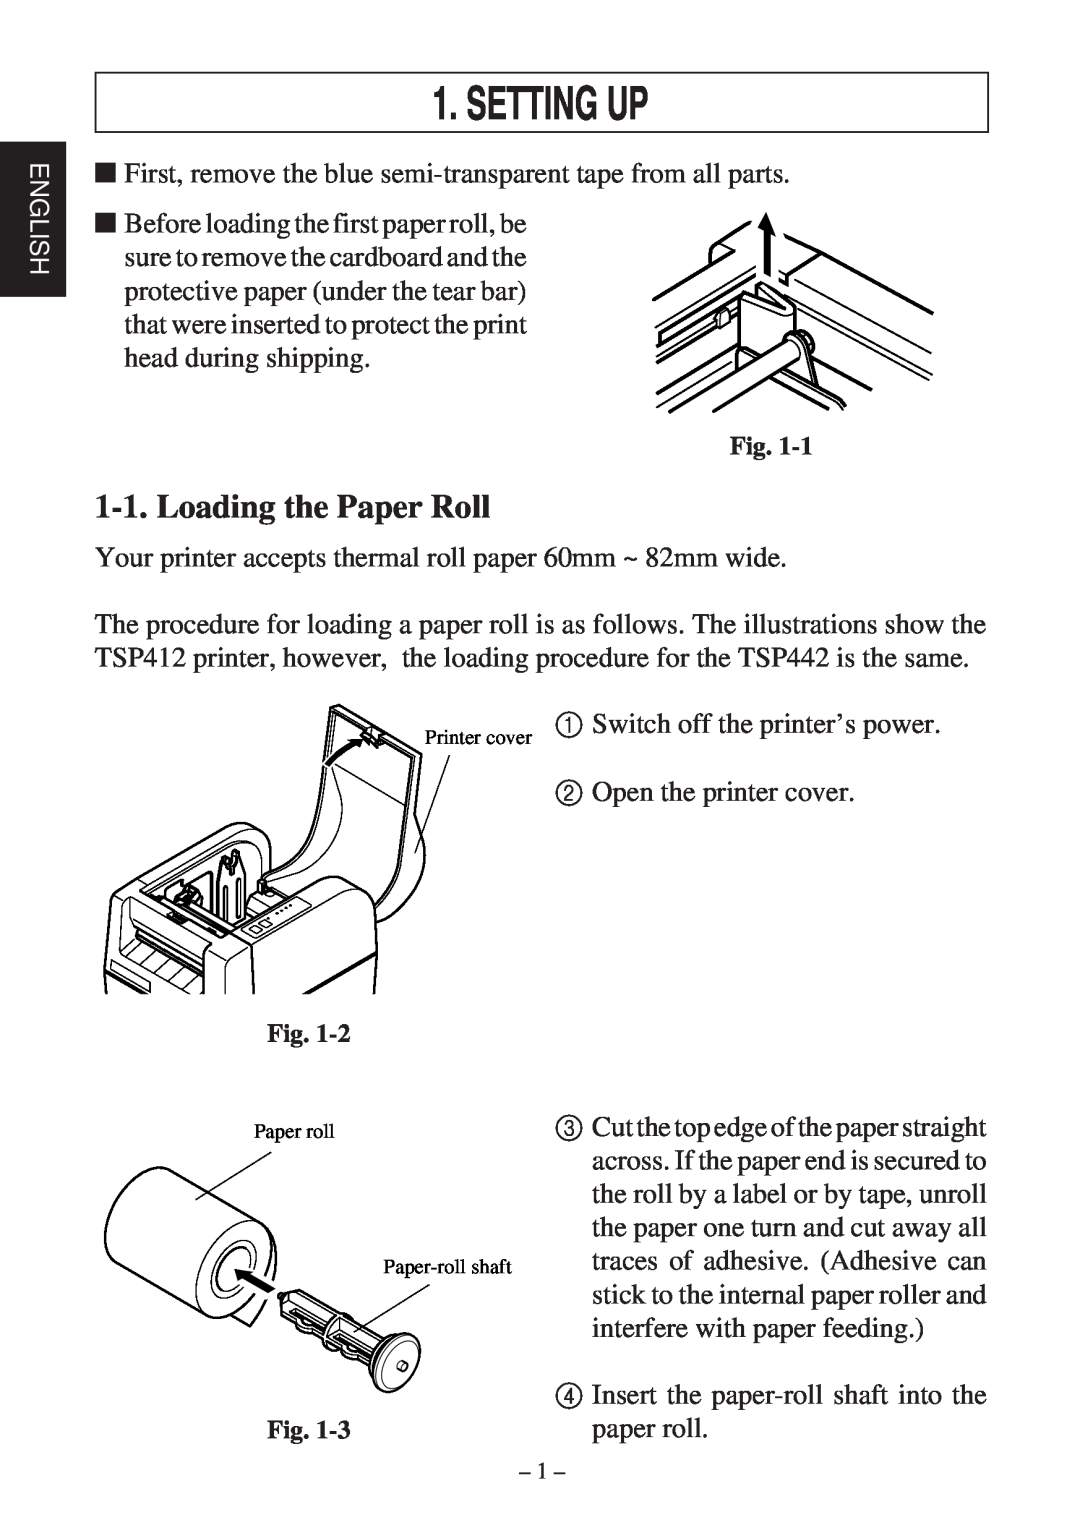 Star Micronics TSP400 Series user manual Setting Up, Loading the Paper Roll 